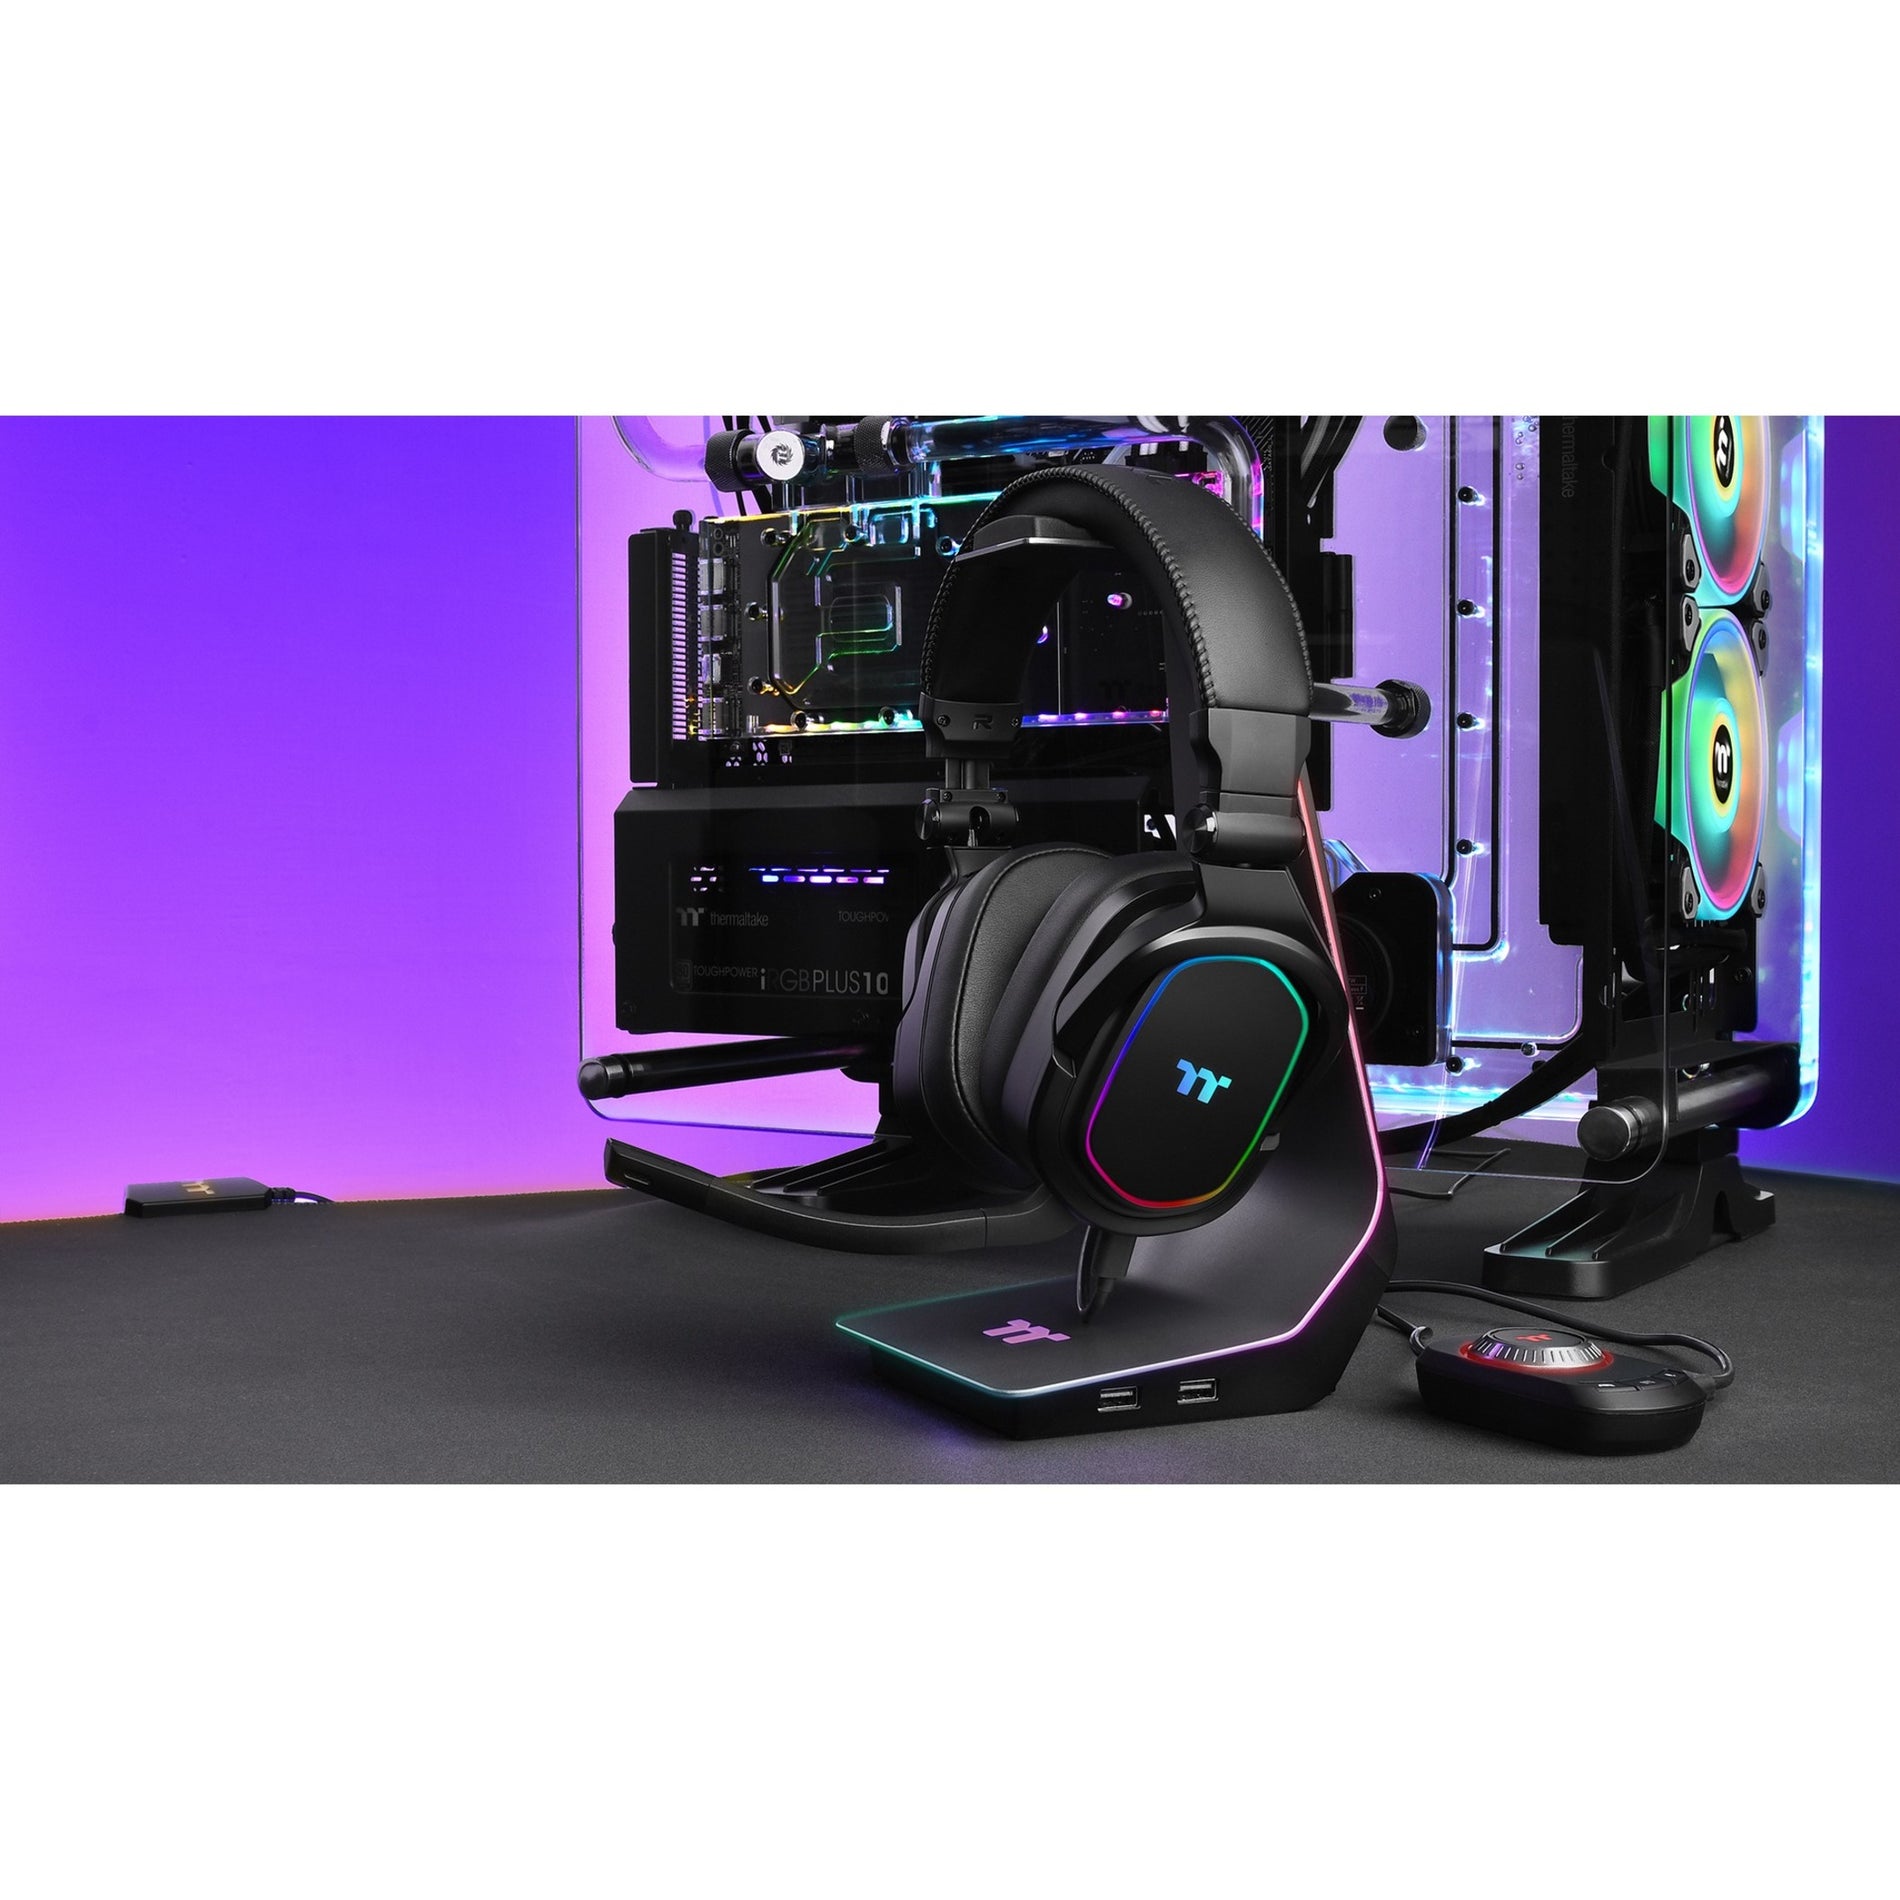 Thermaltake GHT-THF-DIECBK-31 ARGENT H5 RGB 7.1 Surround Gaming Headset, RGB Light, Plug and Play, In-Line Controller